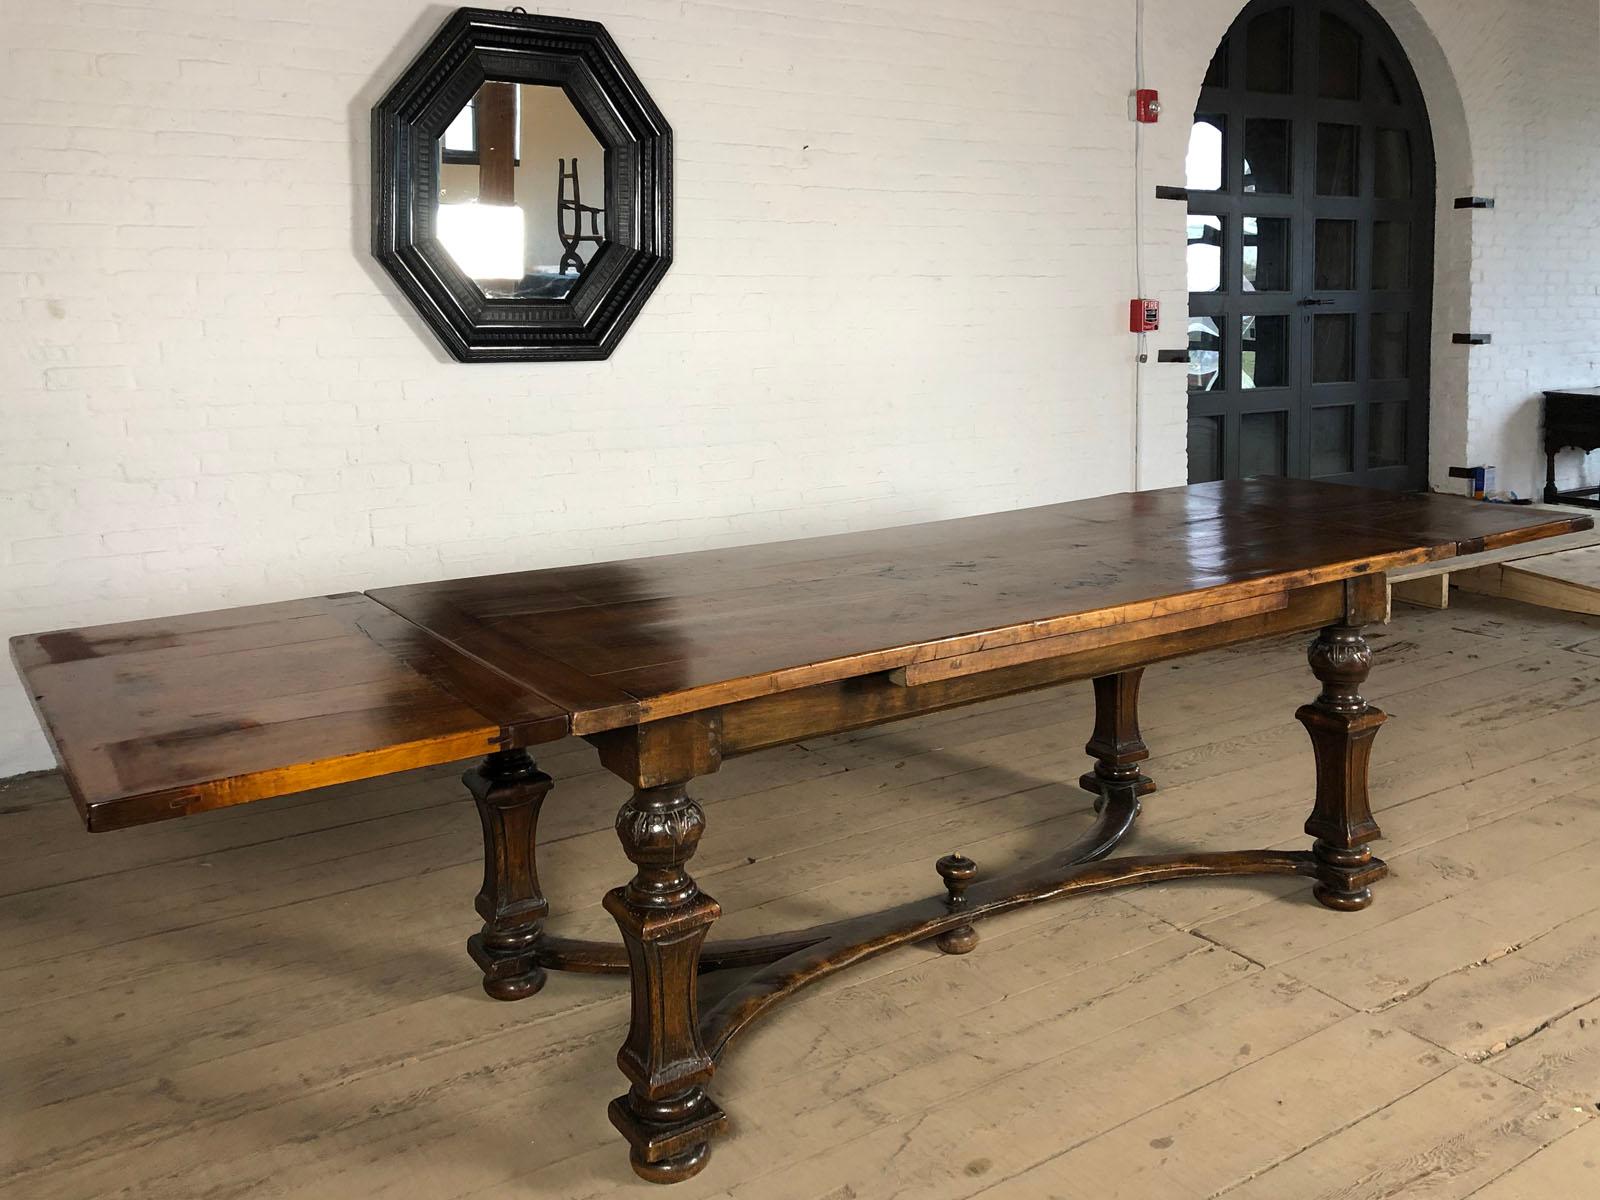 A Southern Swiss or North Italian walnut draw-leaf table of elegant, unique design.
The draw-leaf mechanism allows flexibility, from seating comfortably six when closed to 10 when extended.
The extension leaves can be pulled out from under the top